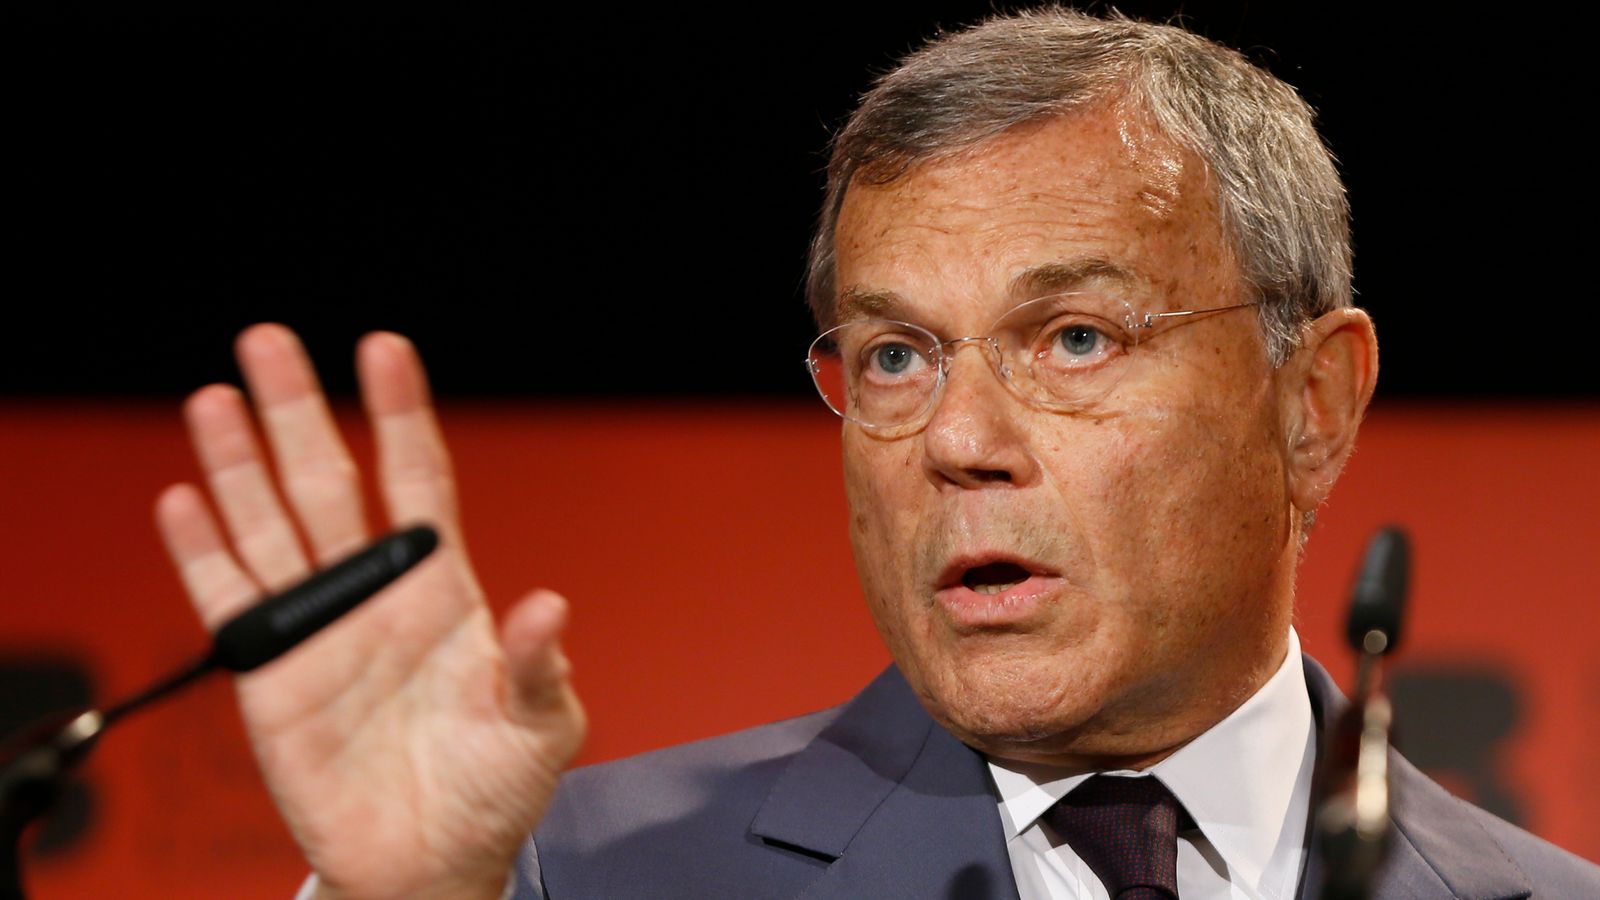 Sorrell-backed venture fund takes stake in digital asset manager Tenovos